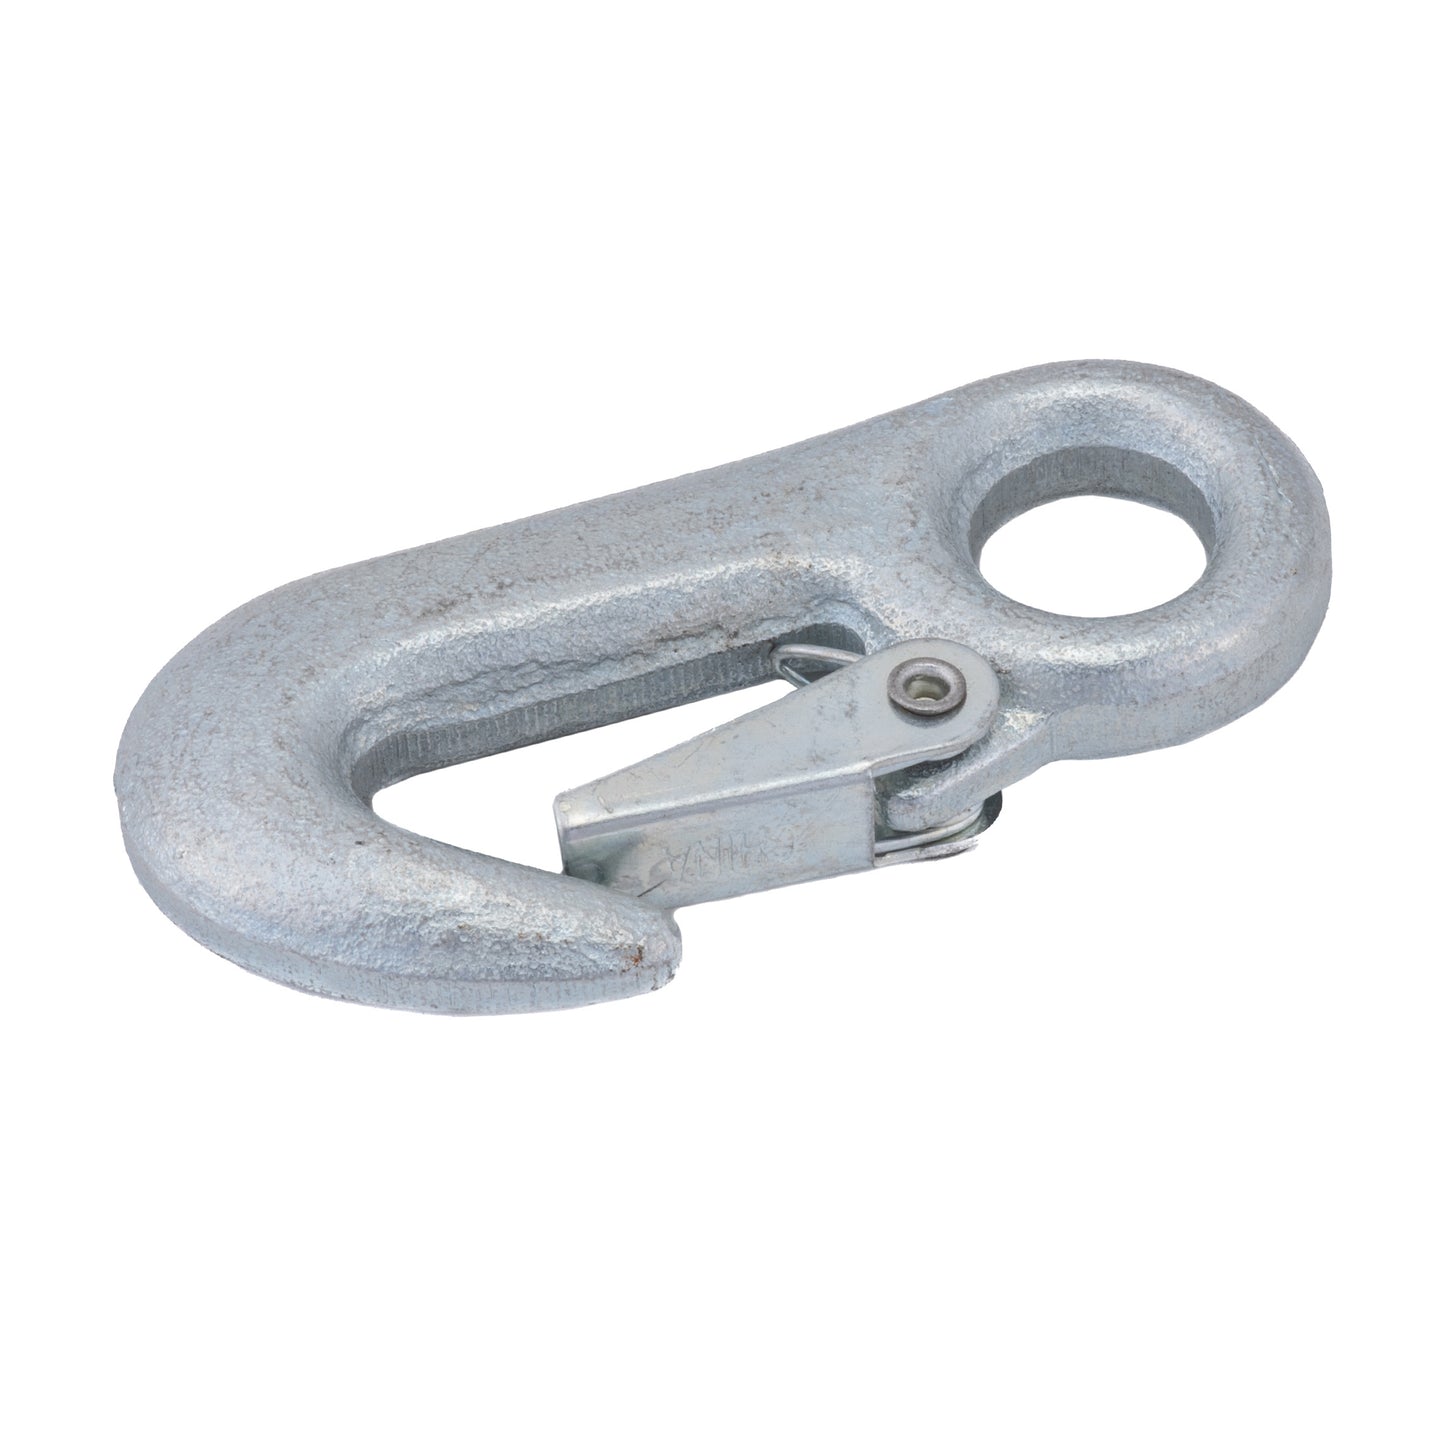 Nickle Plated Steel Utility Snap Hook with 9/16" Hook